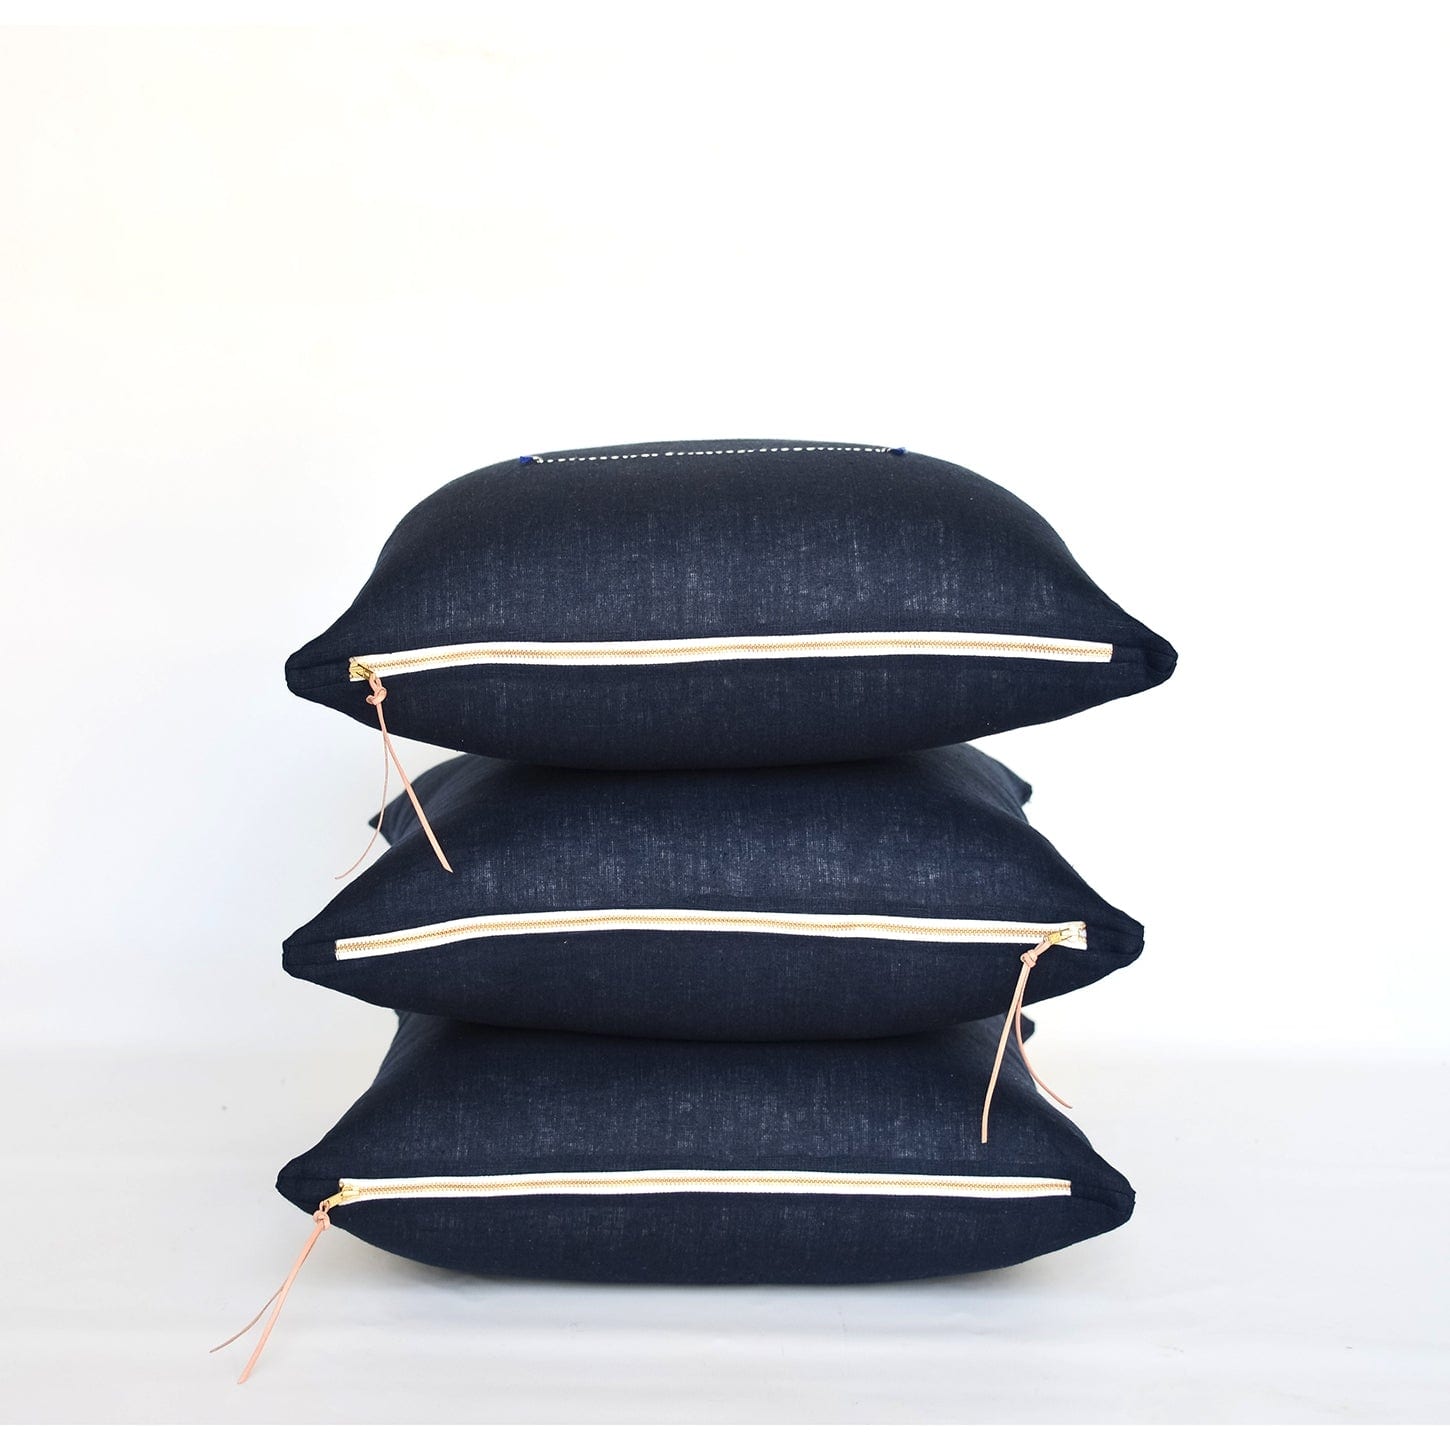 3 stacked Navy Linen Pillows with brass zipper and leather tassels